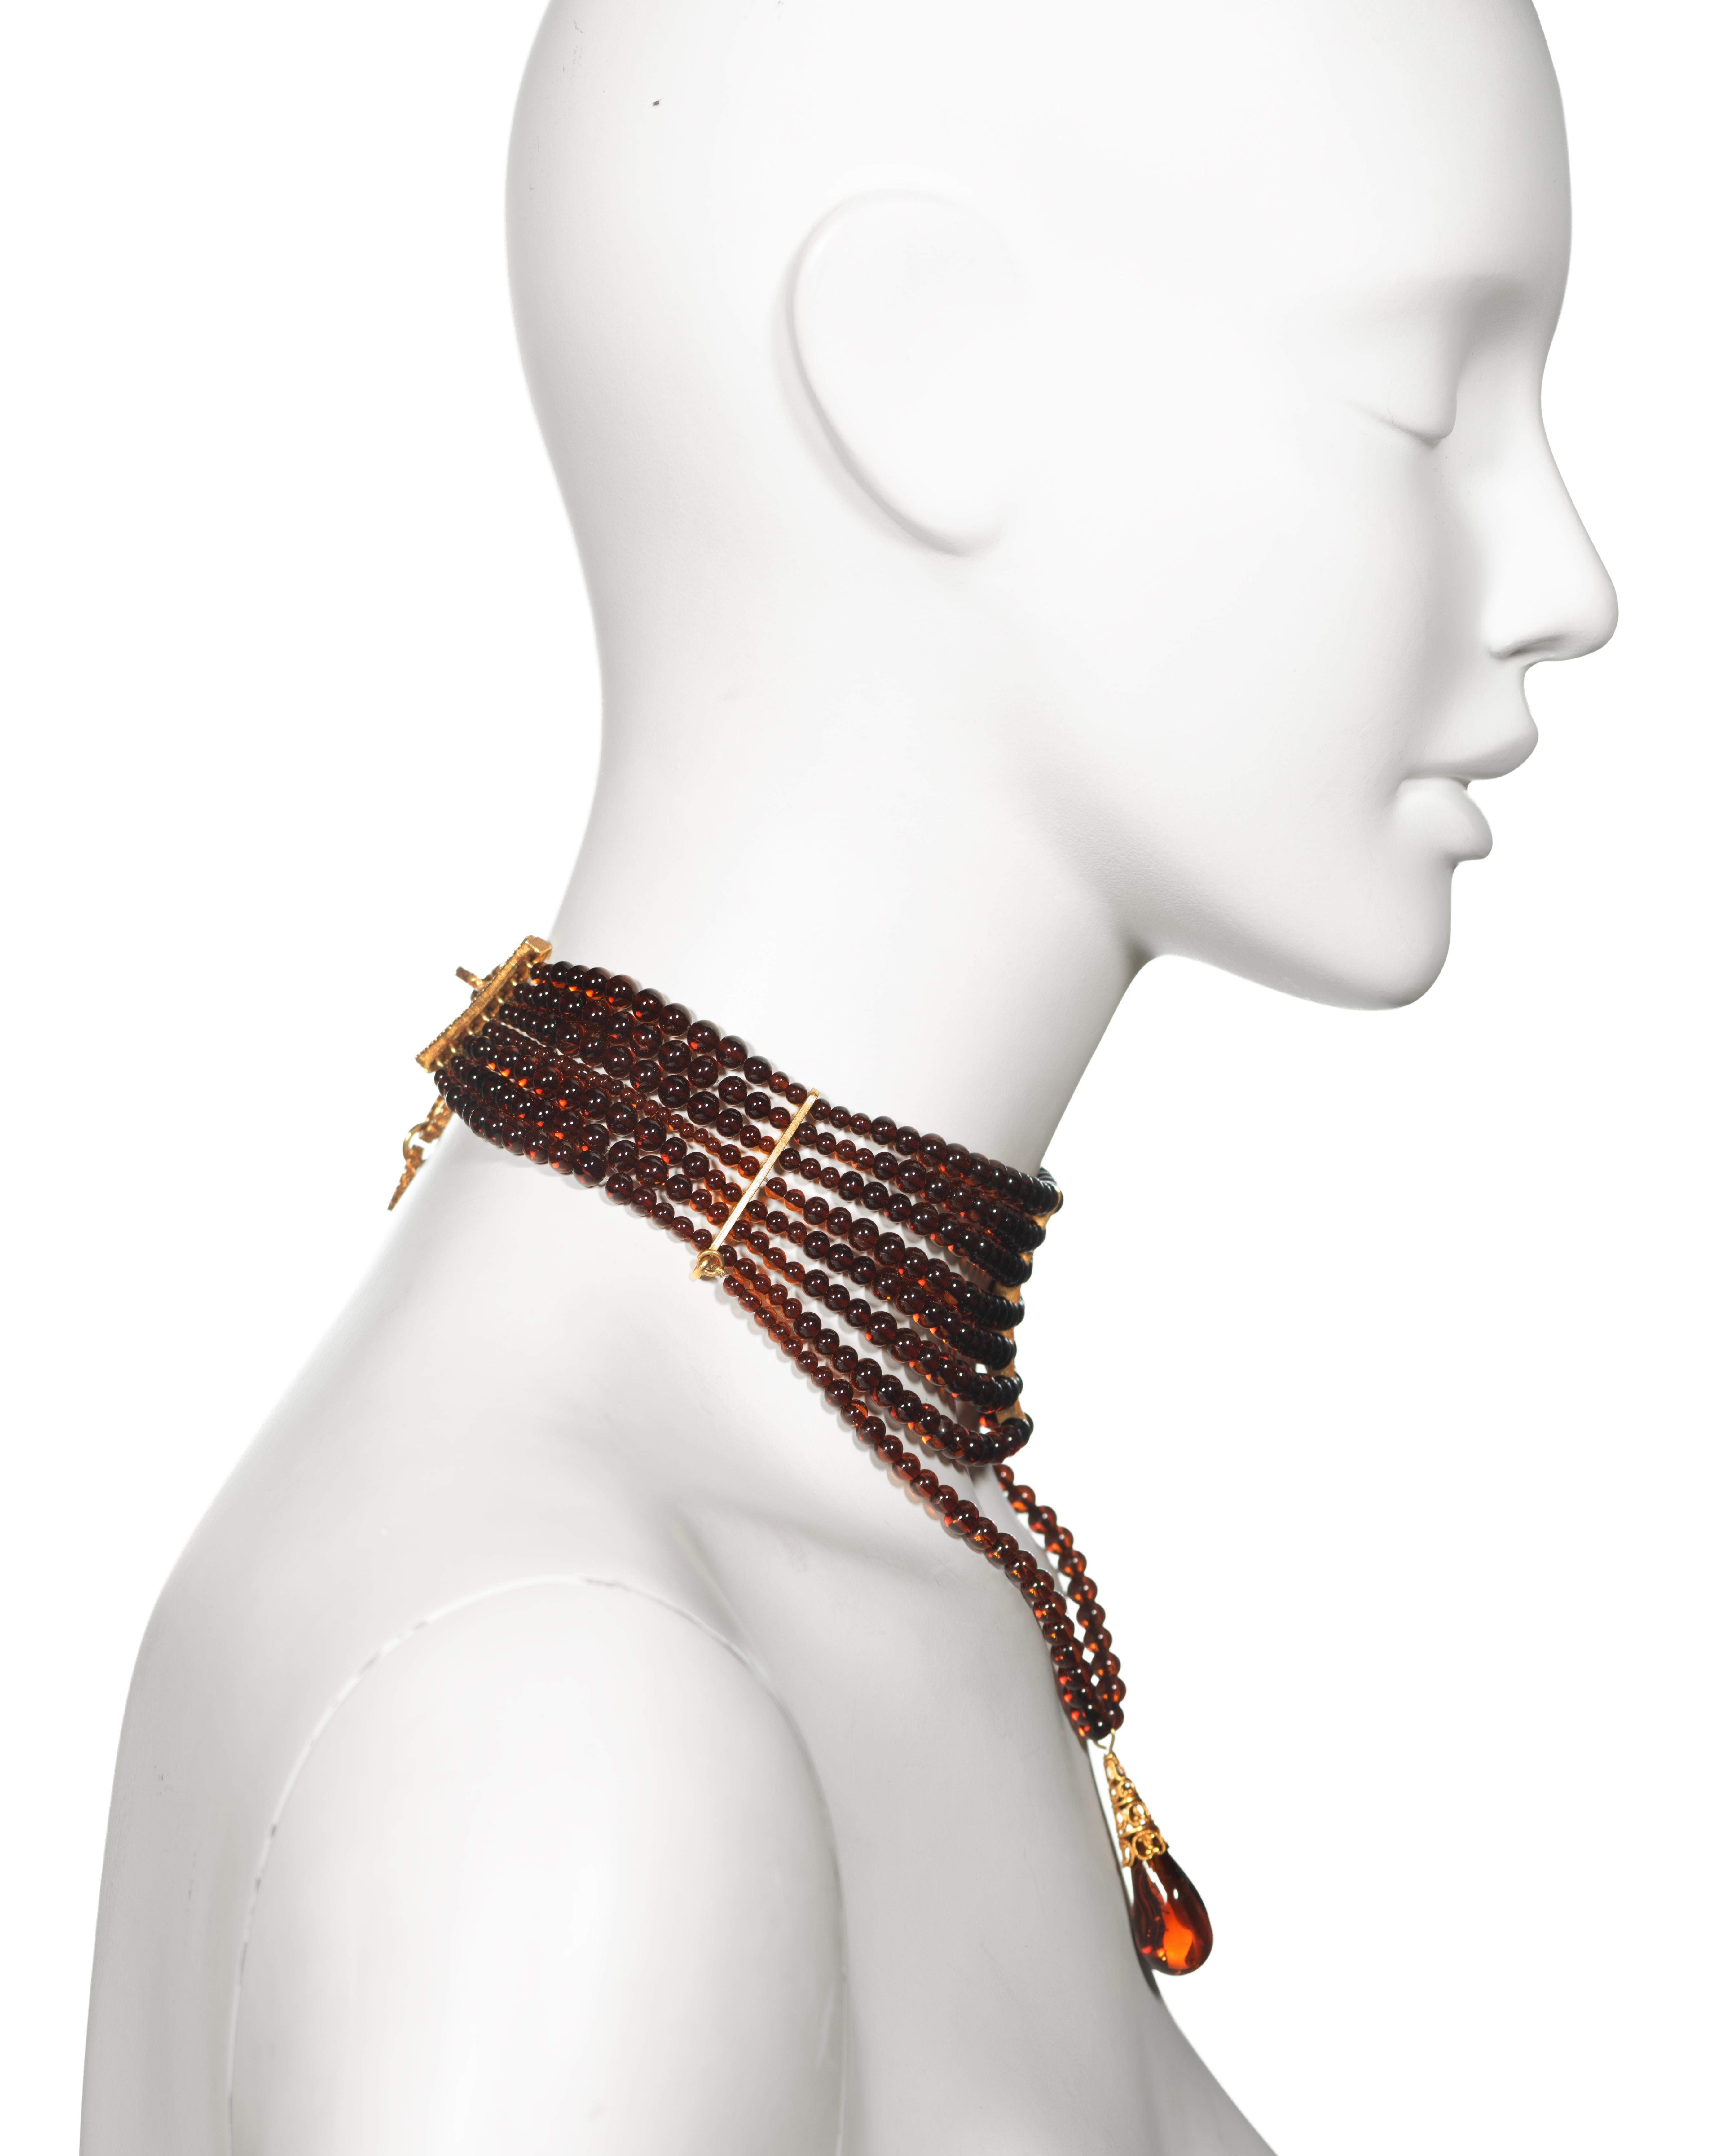 Christian Dior by John Galliano Amber Glass Bead Choker Necklace, c. 1998 For Sale 2